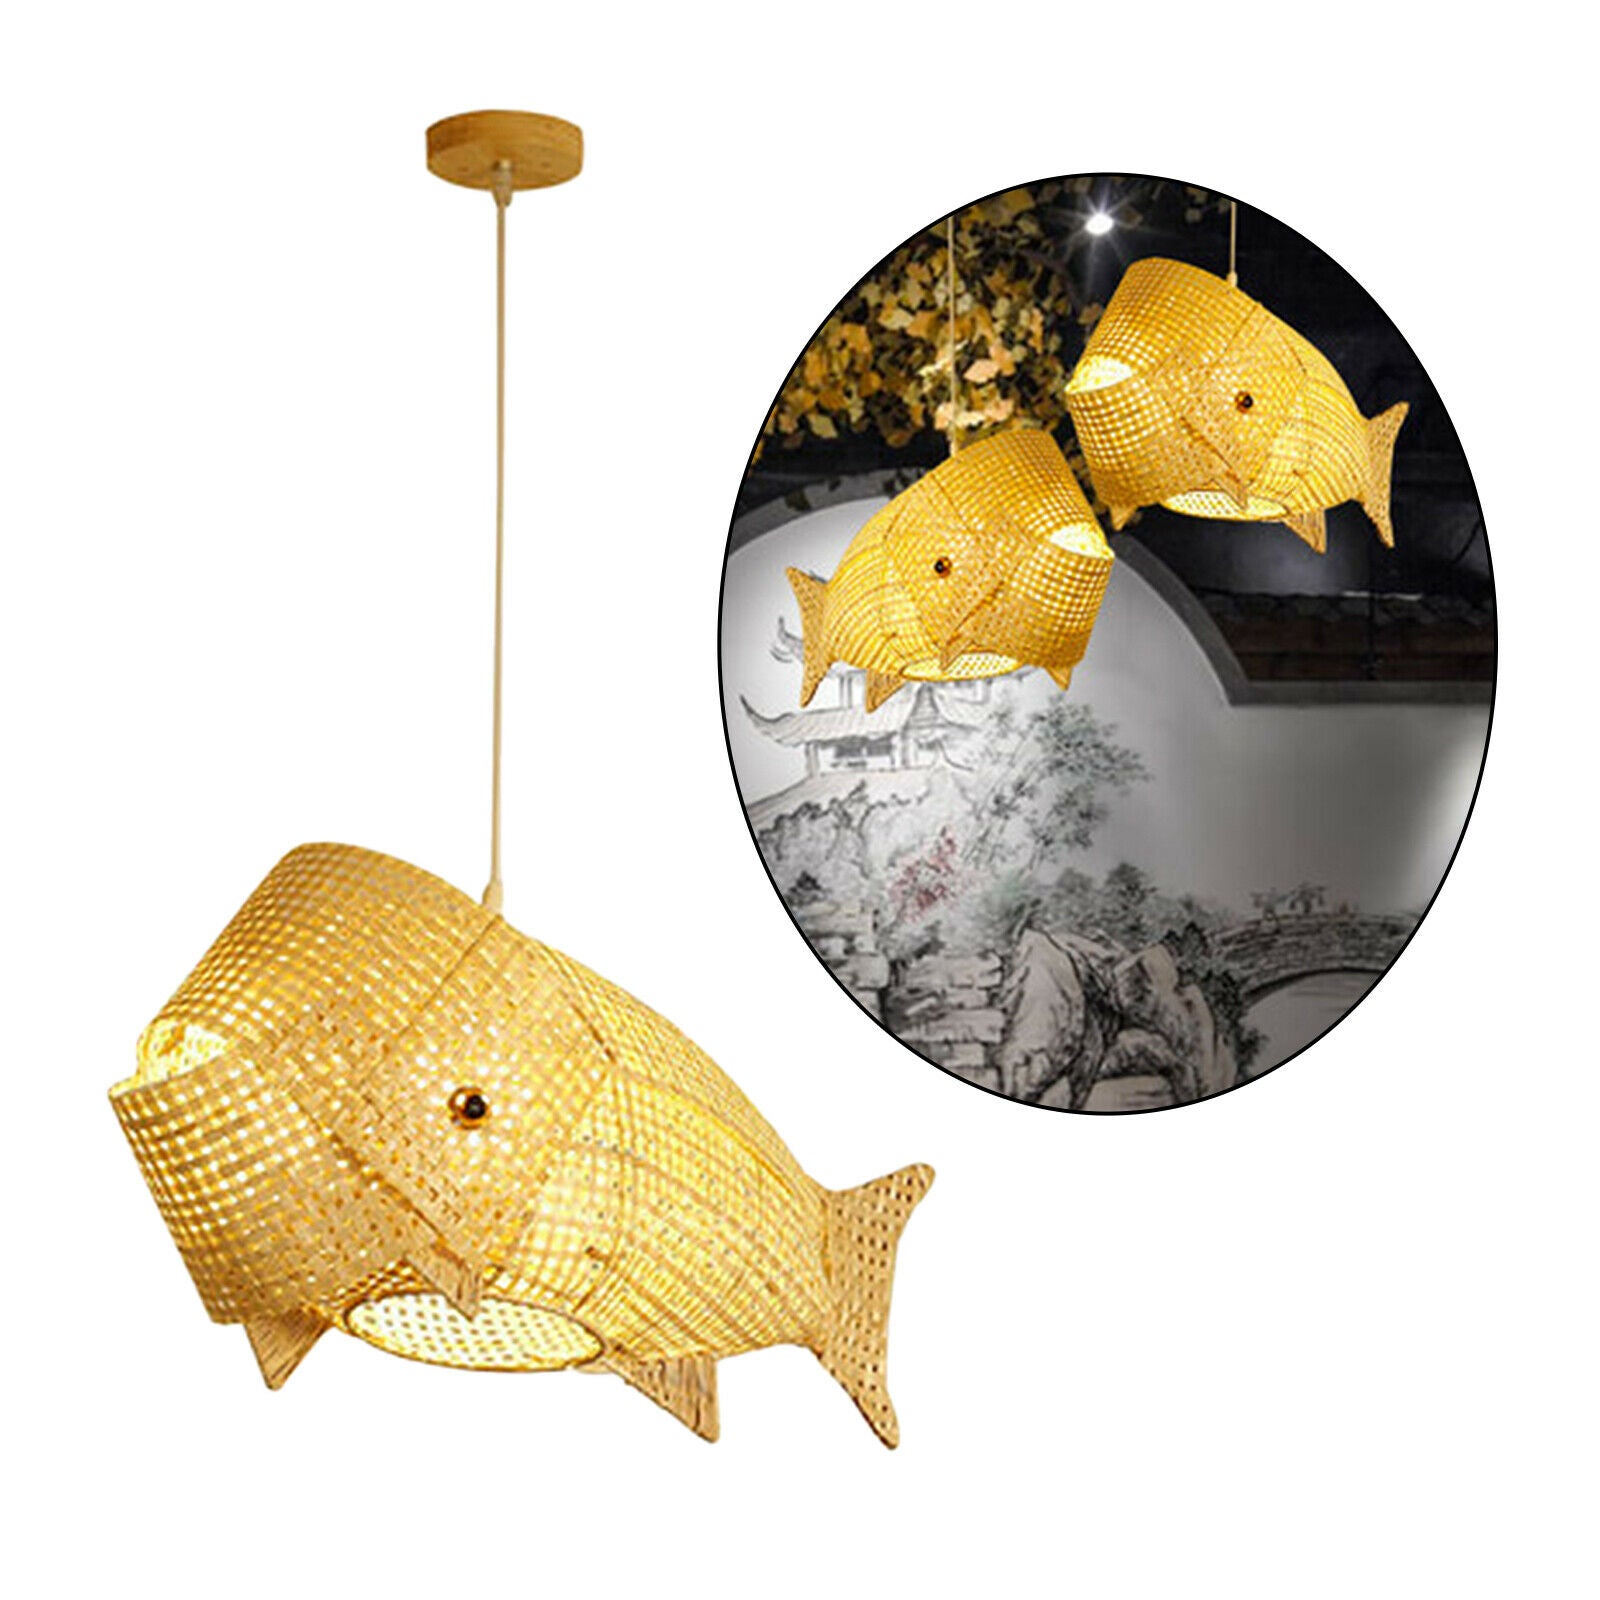 Fish Shaped Bamboo Lampshade Bedroom Office Teahouse Chandelier Lamp Cover